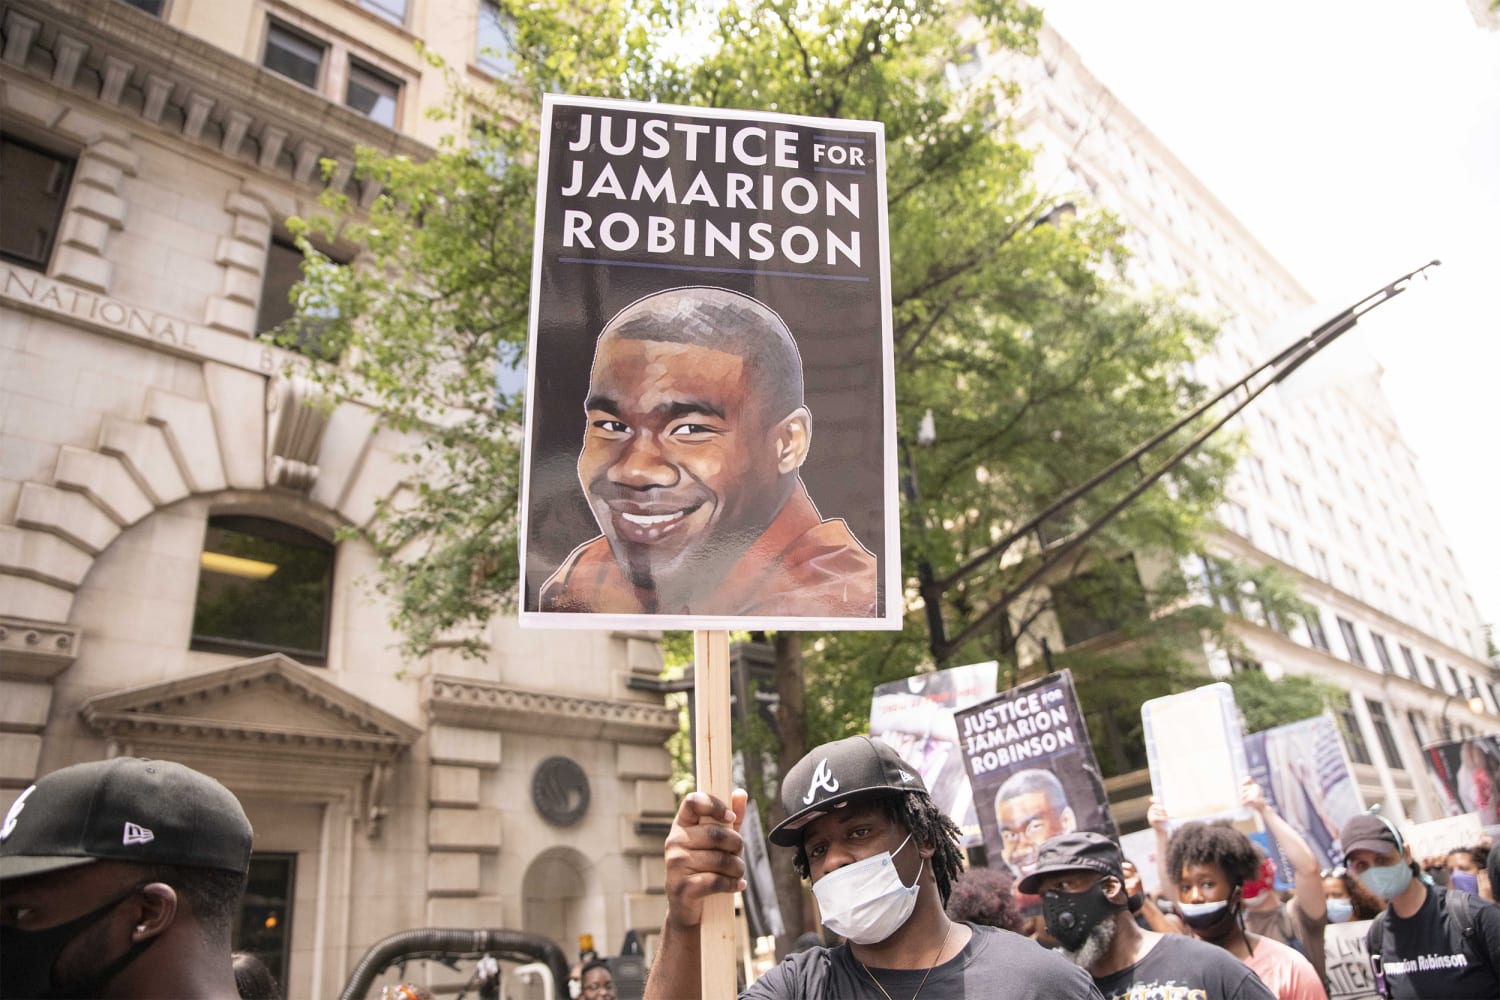 Officers shot a Black man 59 times. Convicting a federal agent won’t be easy.